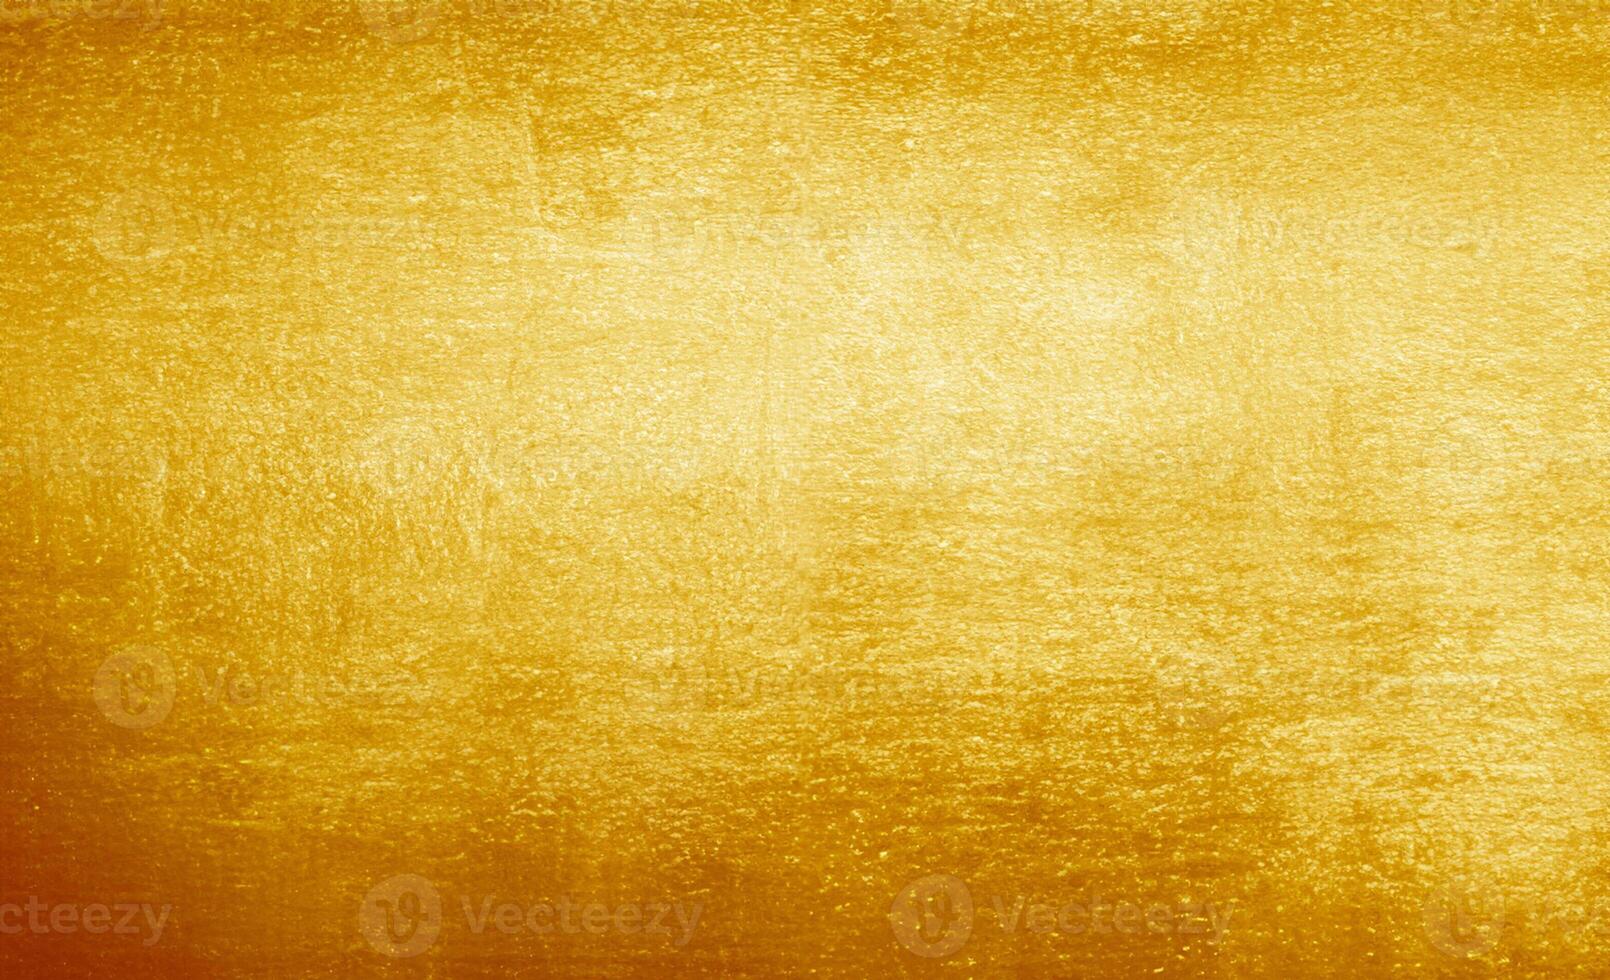 wall gold background photo